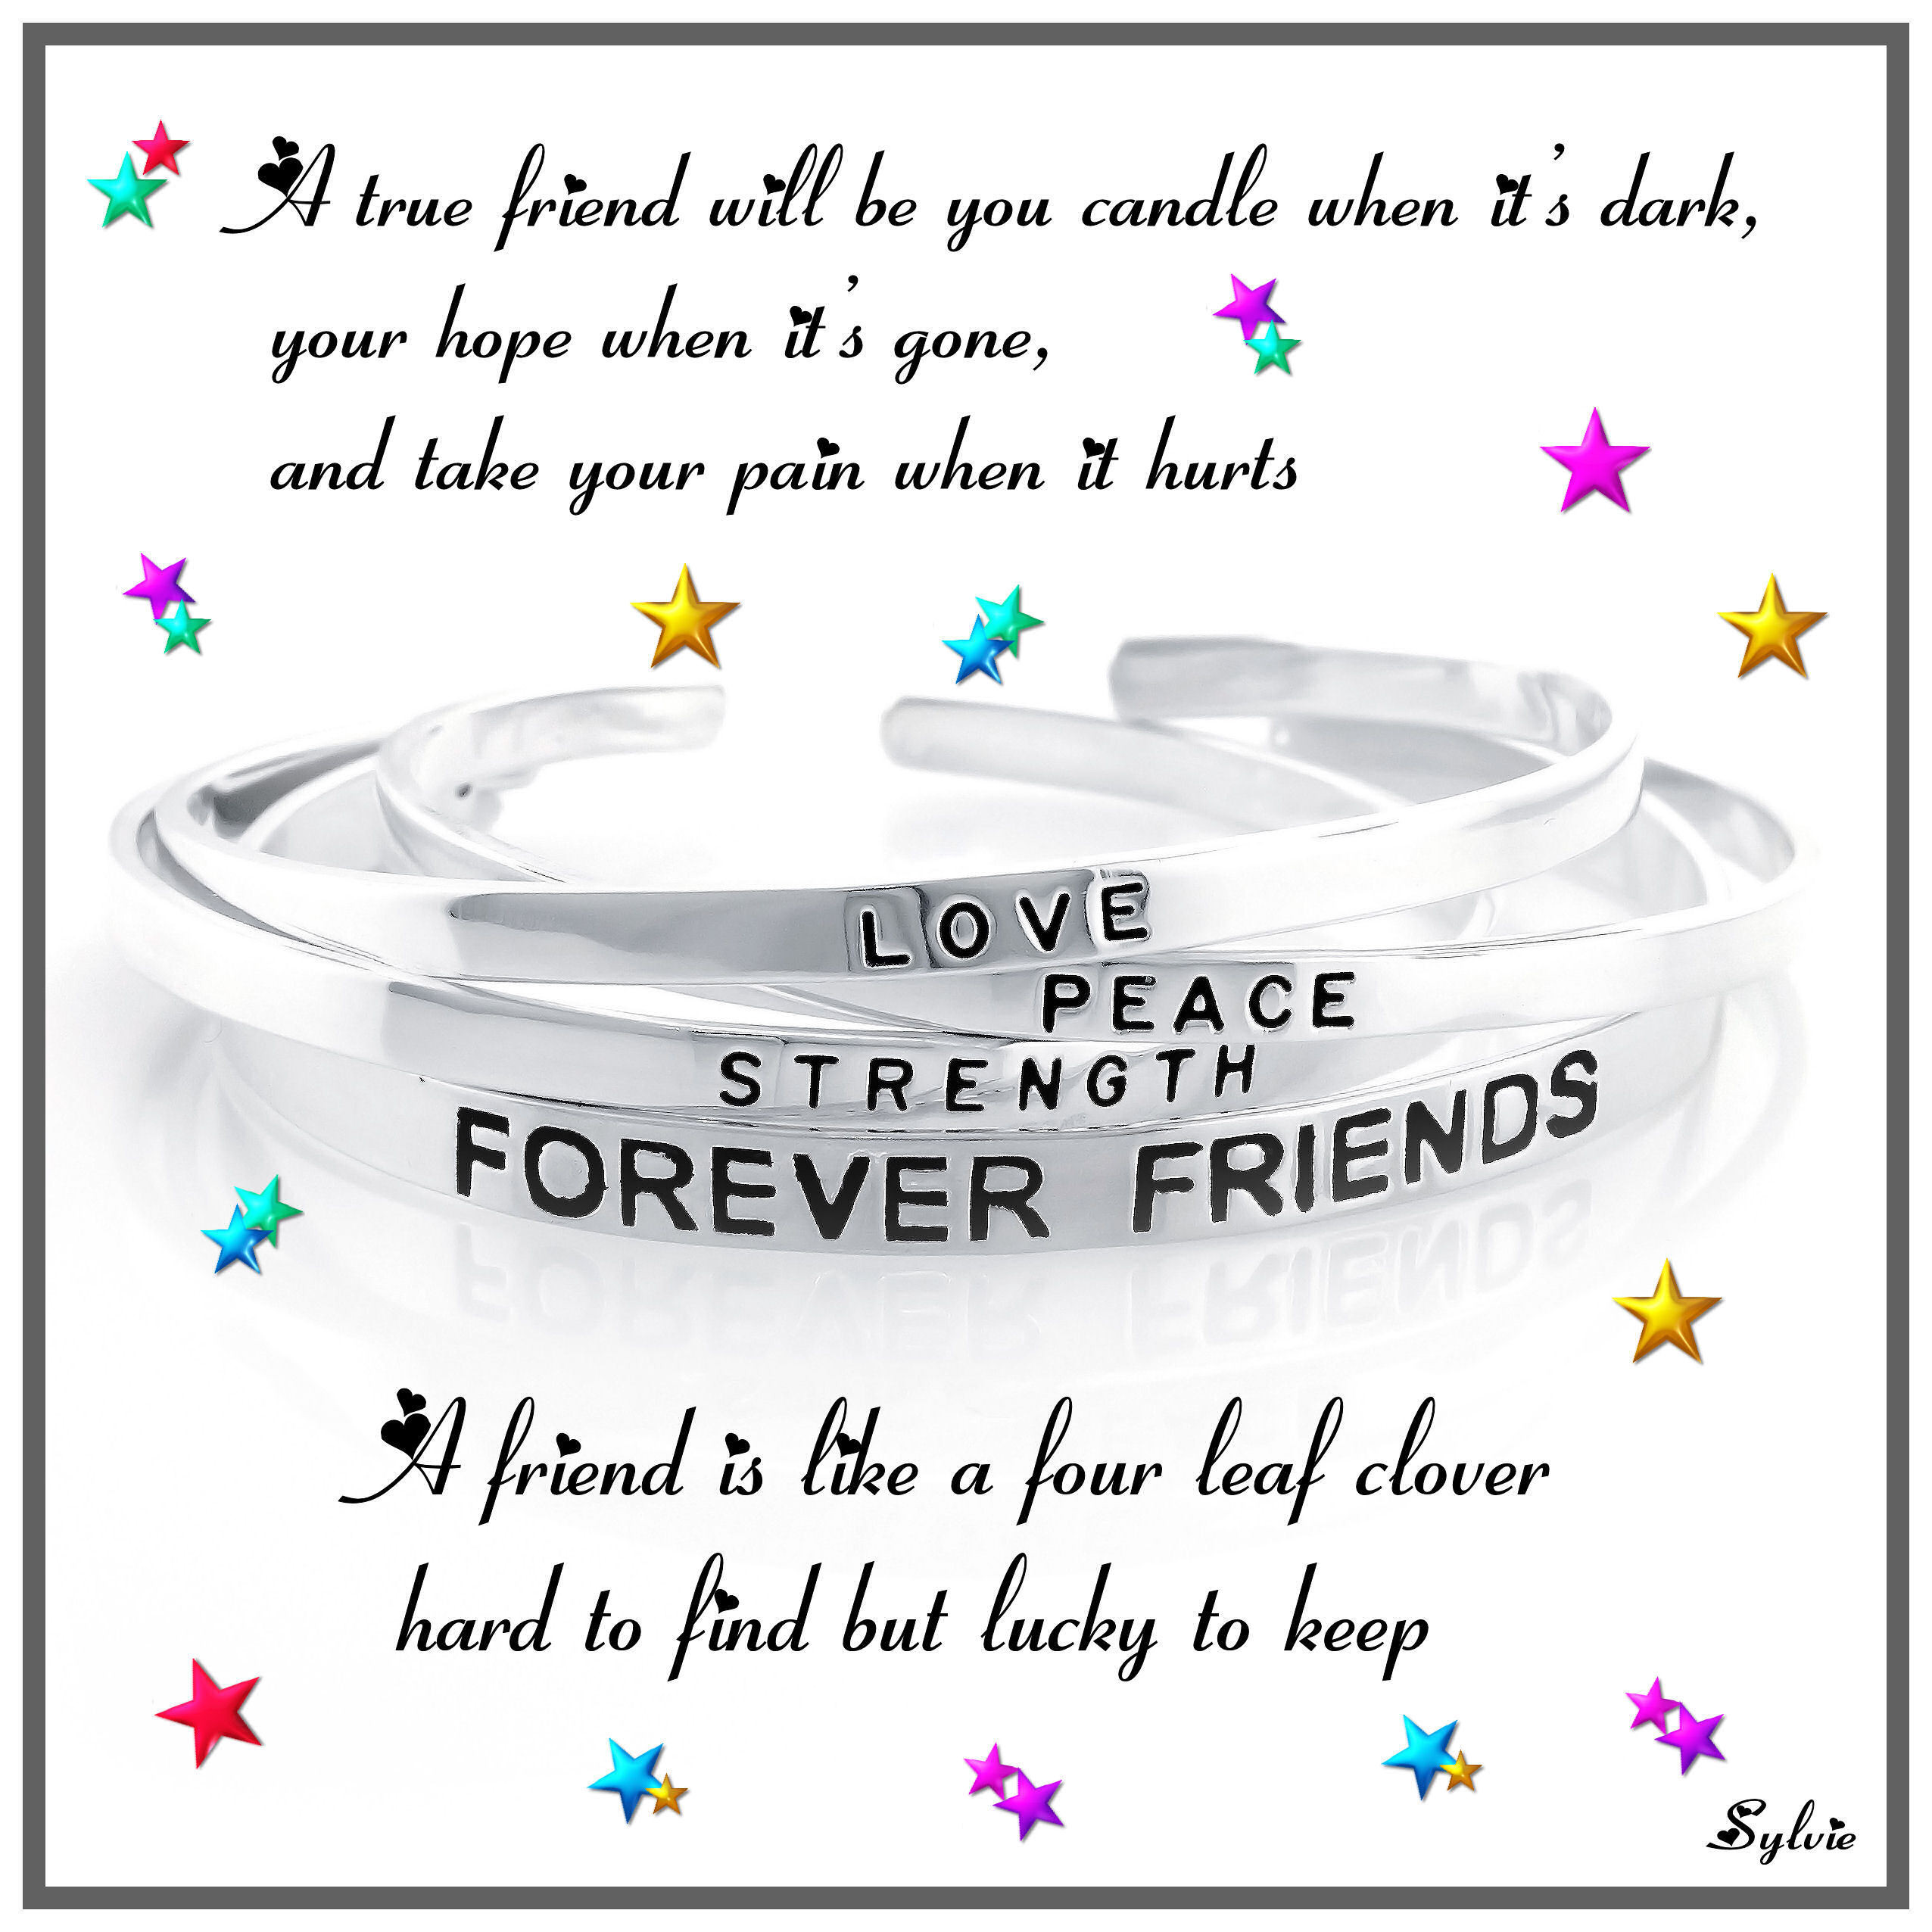 Quote For Your Best Friend Birthday
 Best Friends Birthday Quotes For Girls QuotesGram